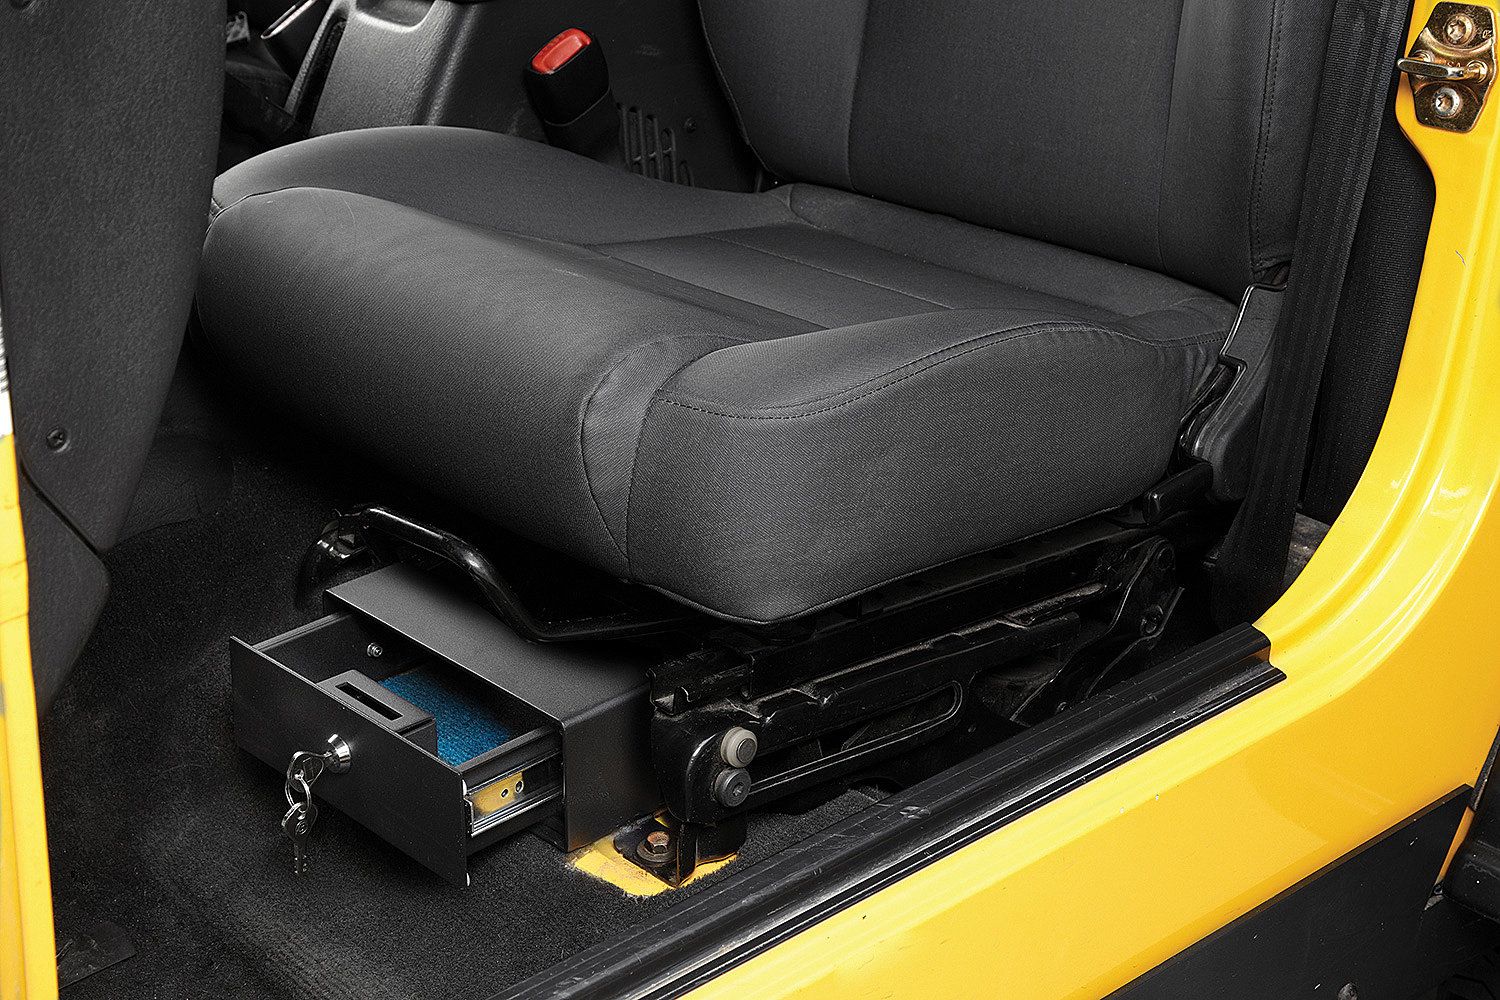 https://www.quadratec.com/sites/default/files/styles/product_zoomed/public/product_images/Bestop-Locking-Under-Seat-Storage-Box-Textured-Black-TJ-Installed.jpg